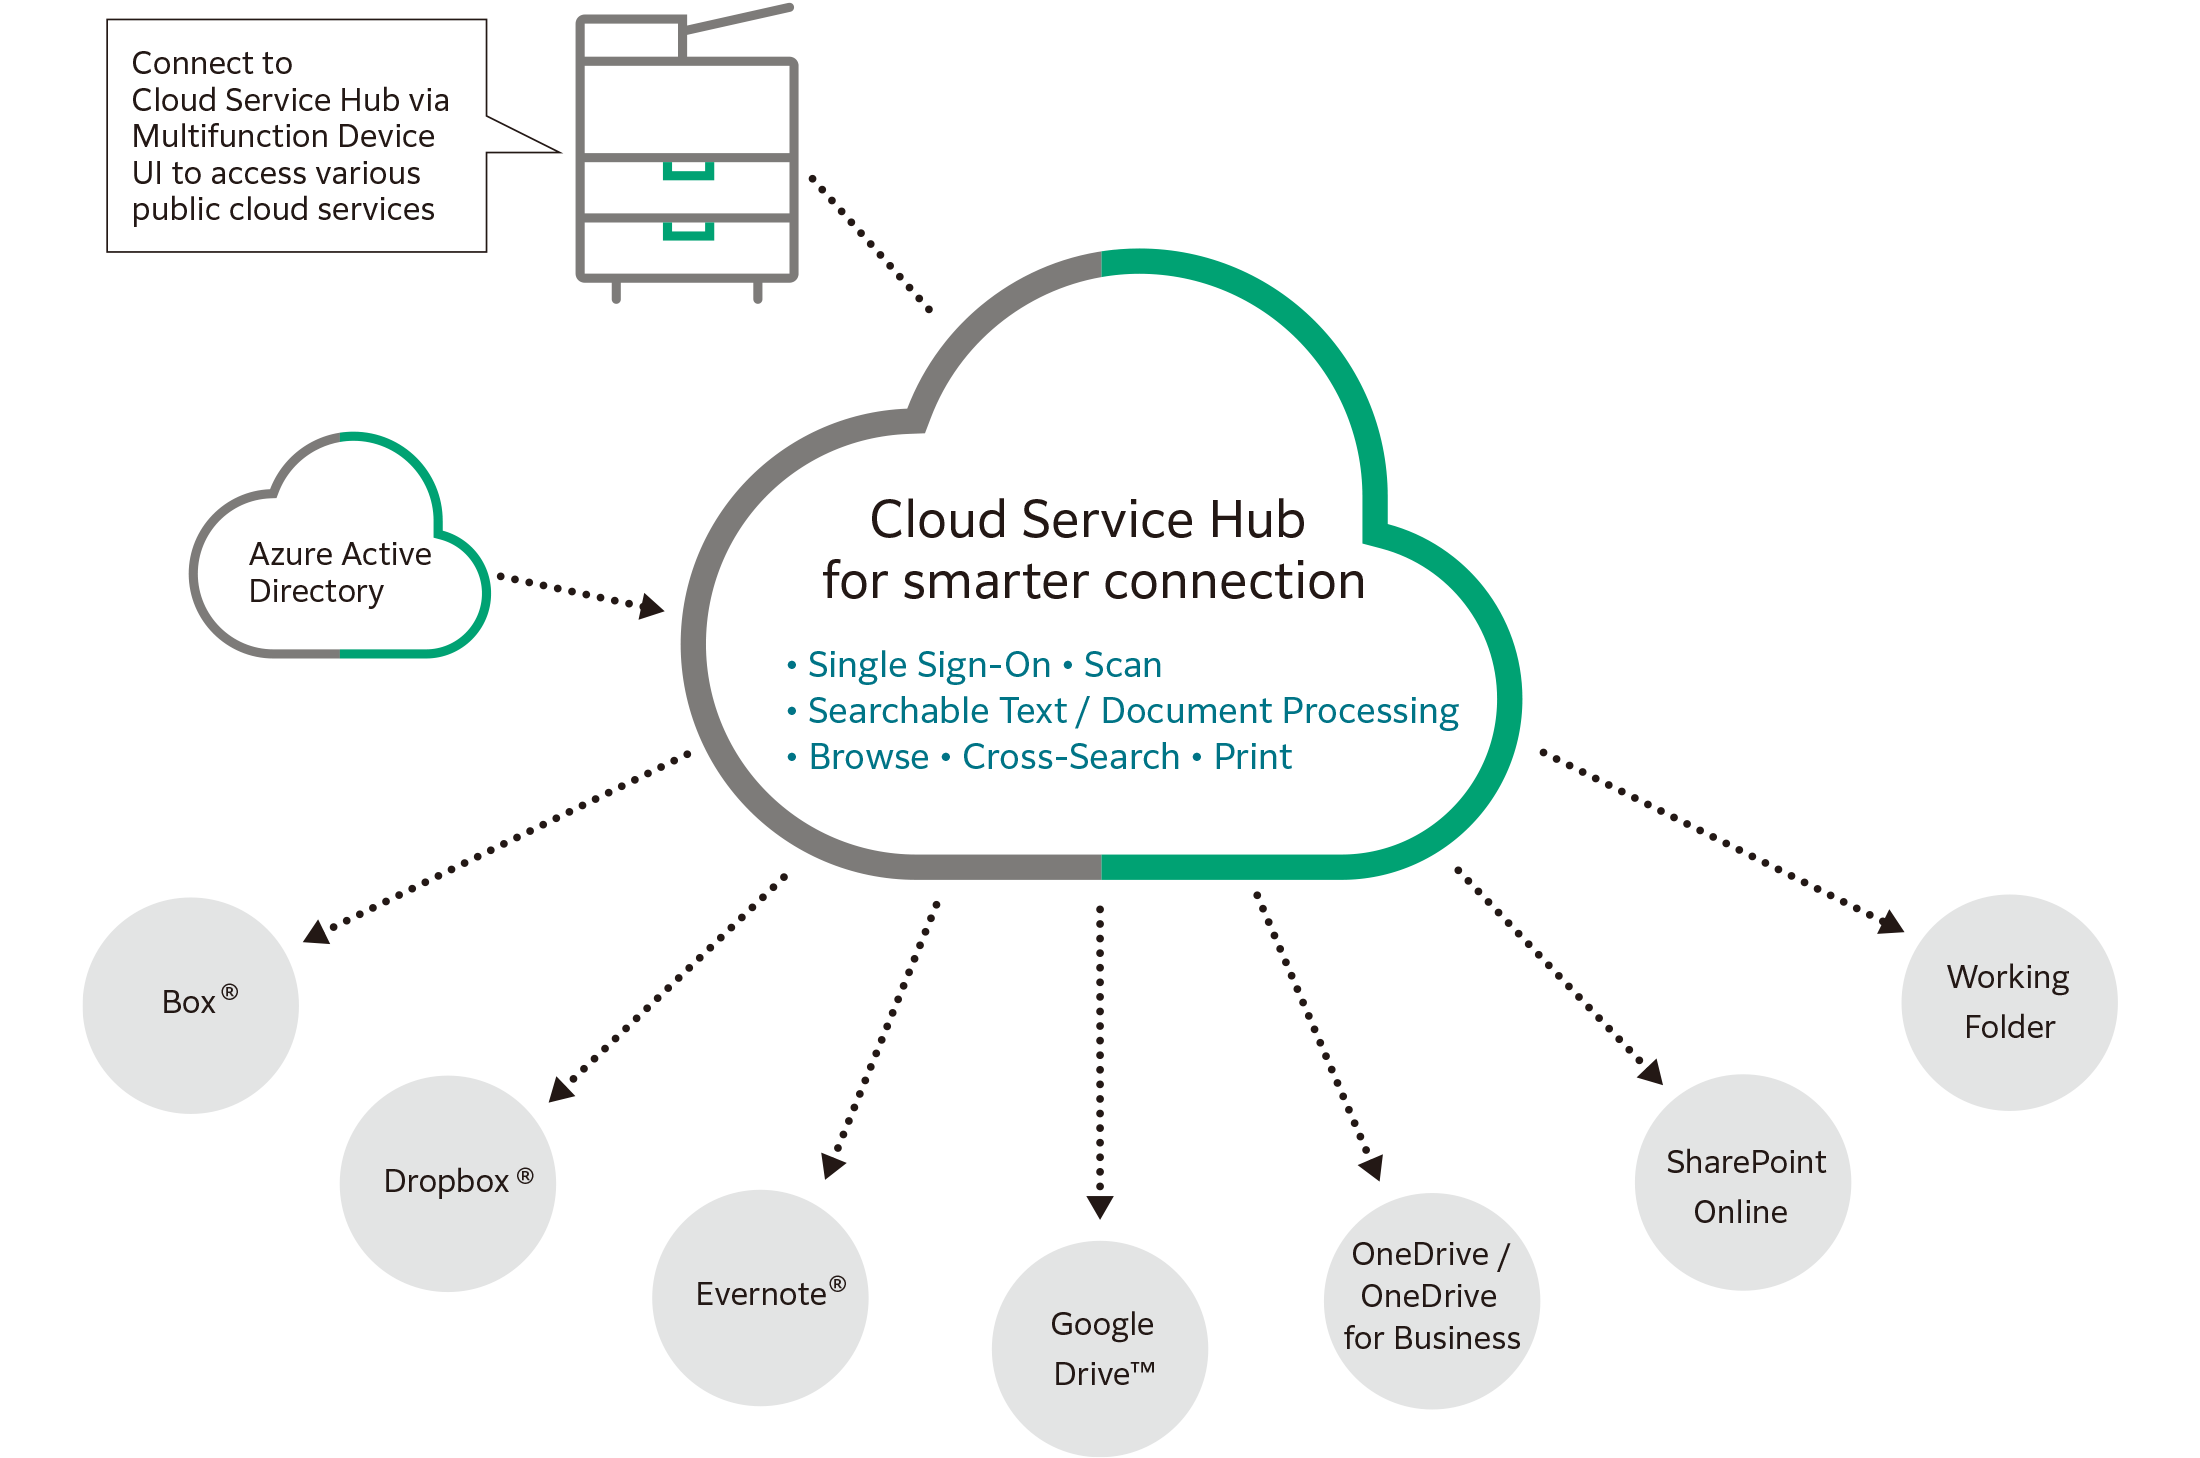 What is Cloud Service Hub?